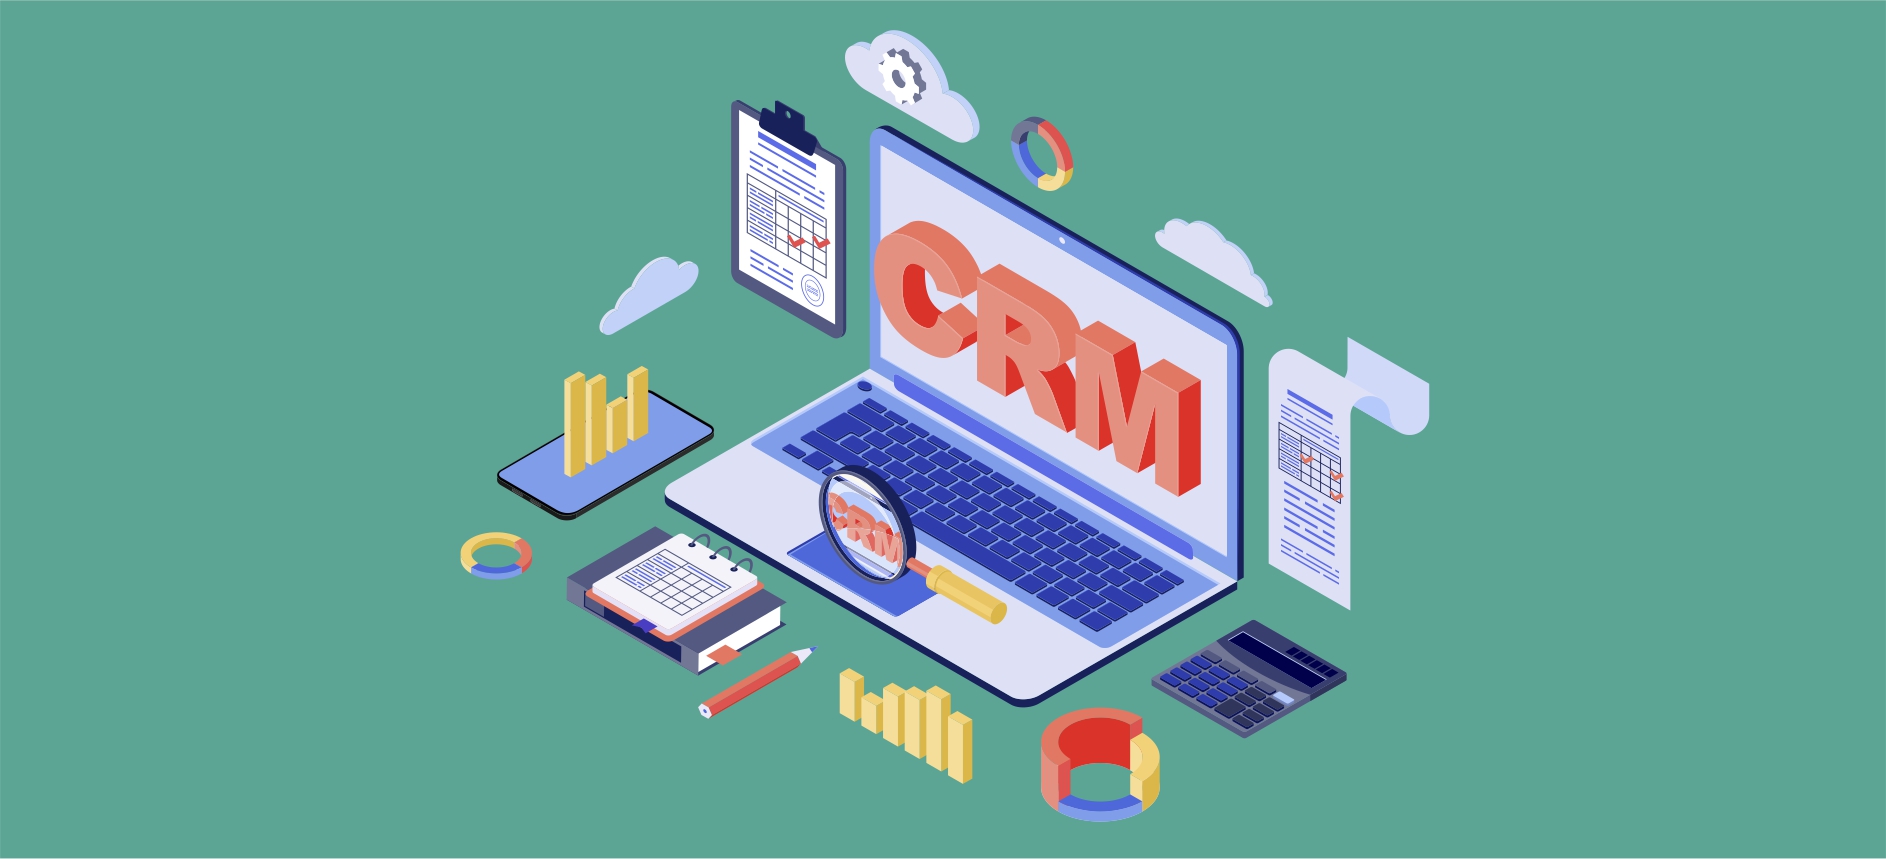 ERP and CRM Software Development